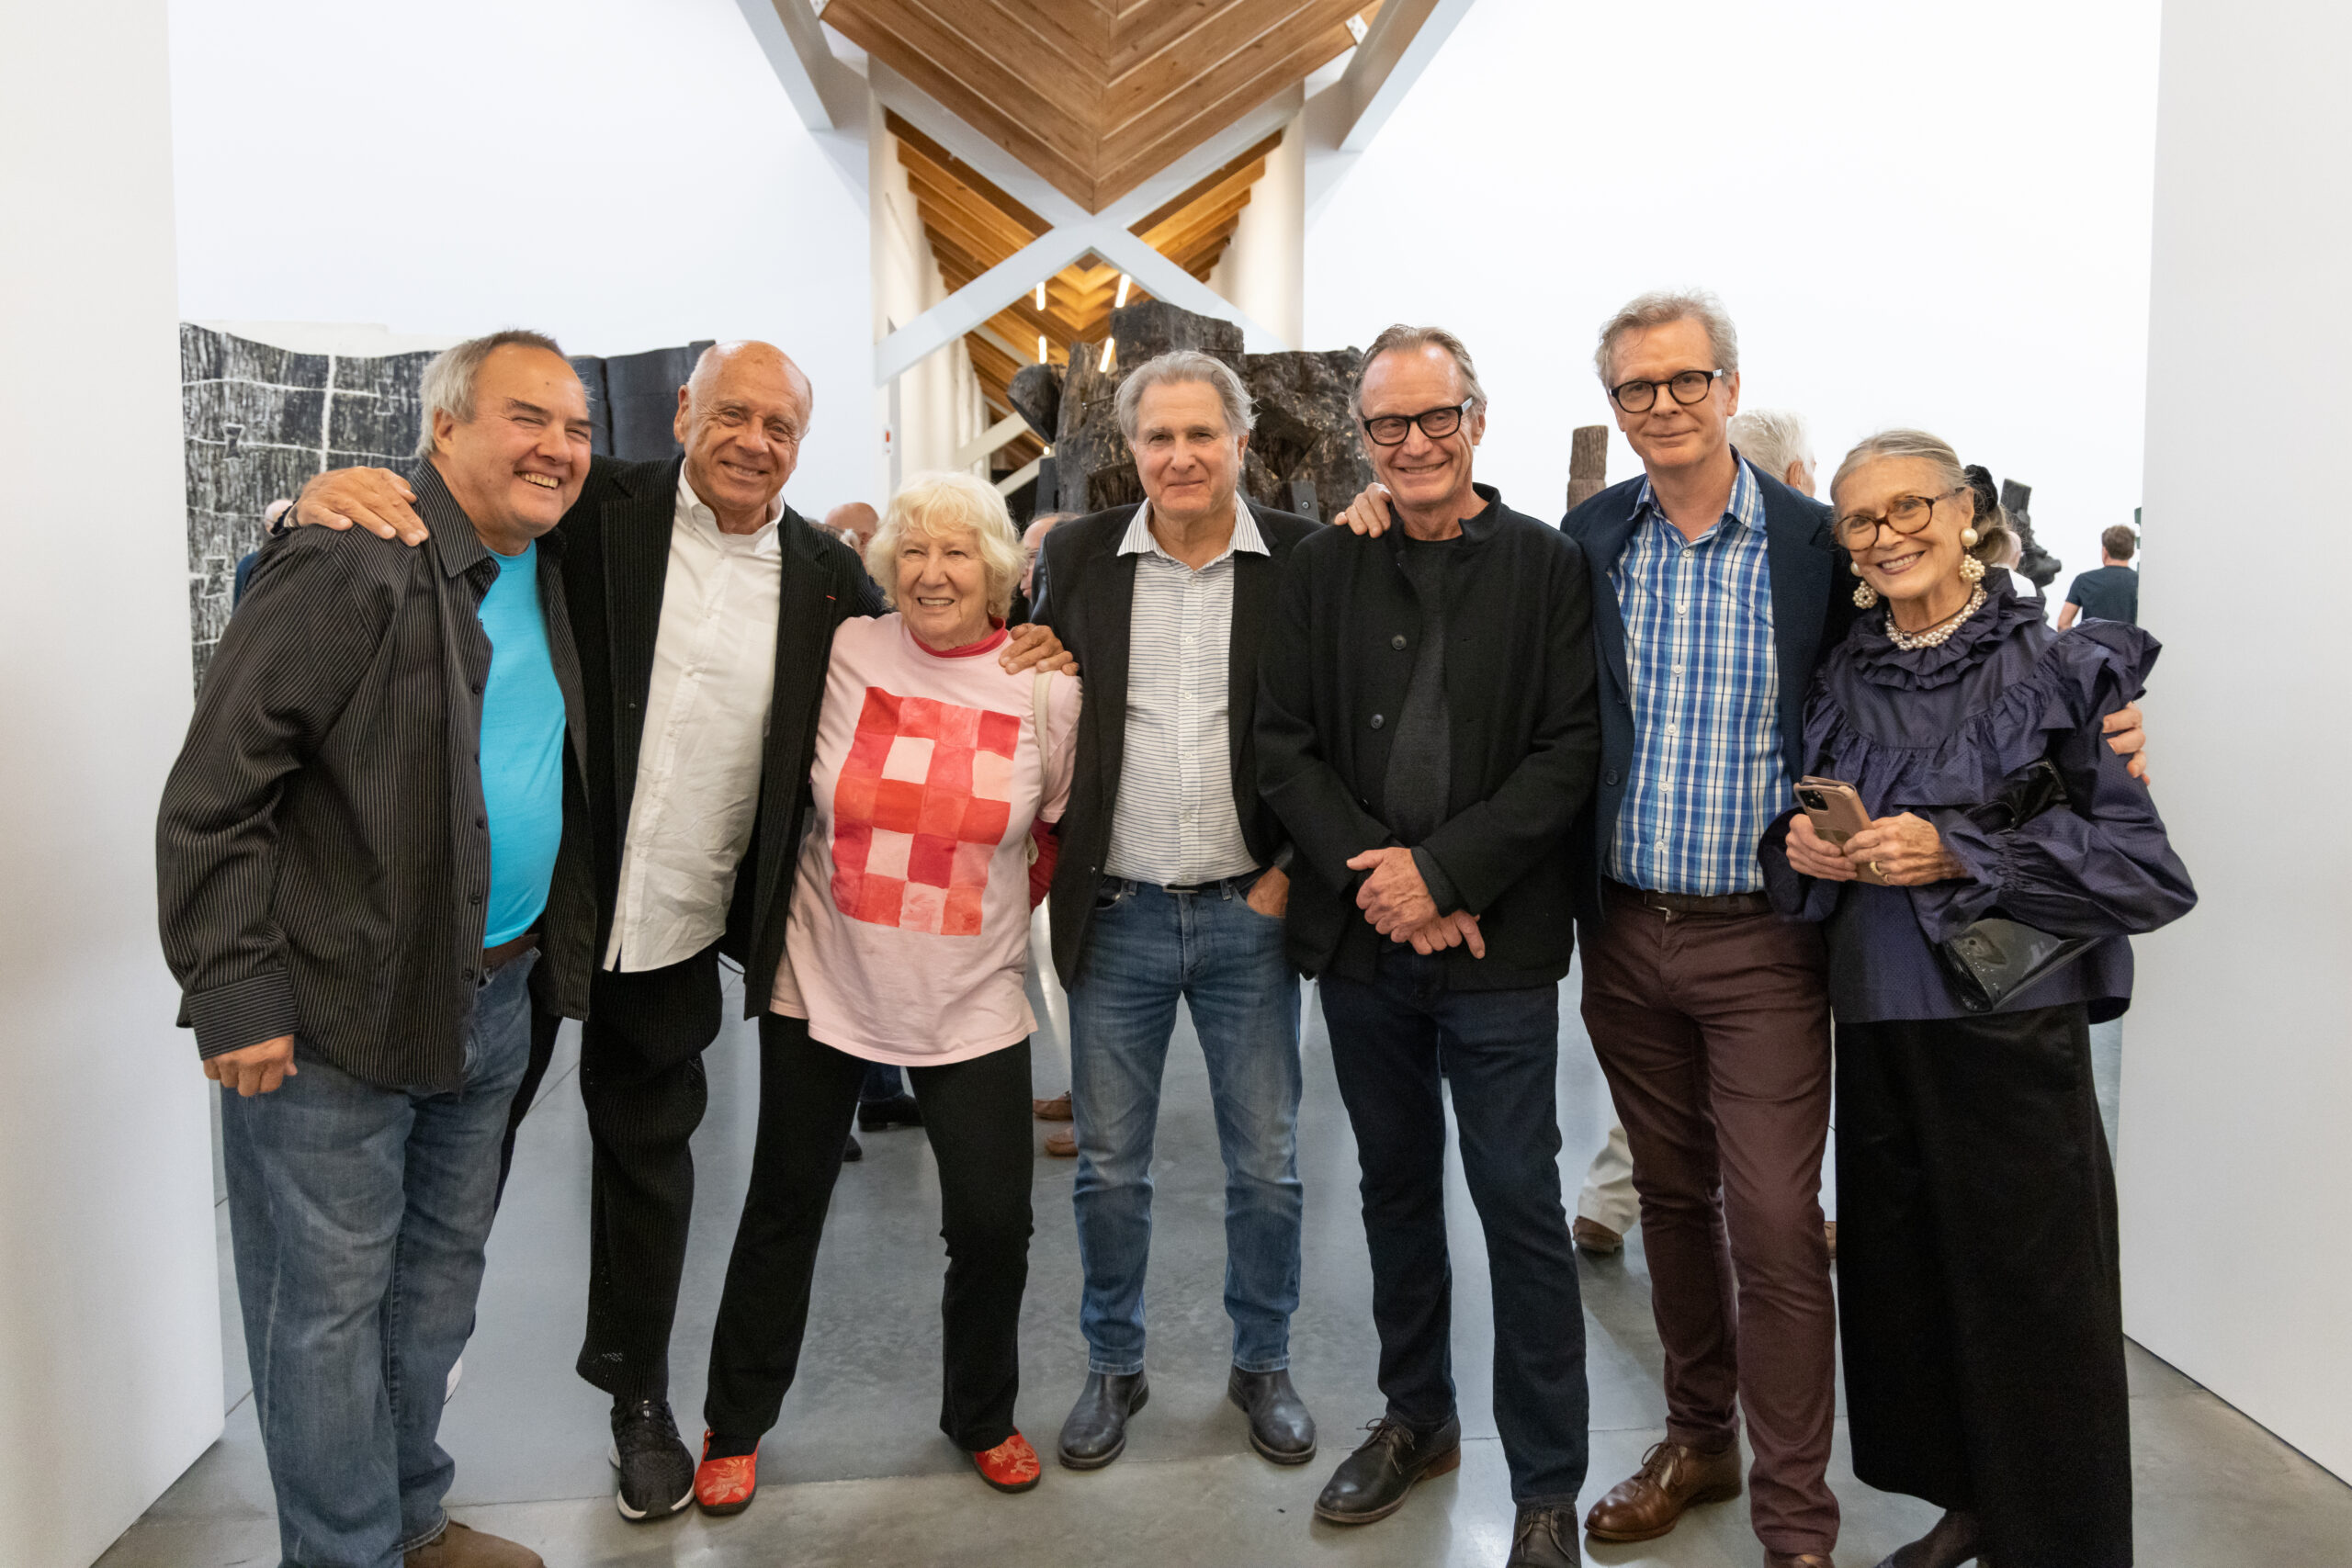 Rick Liss, Ralph Gibson, Mary Heilmann, Ned Smyth, Mel Kendrick, David Nolan and Dianne Blell at the Parrish Art Museum's November 5 opening of “Mel Kendrick: Seeing Things in Things.”JENNY GORMAN